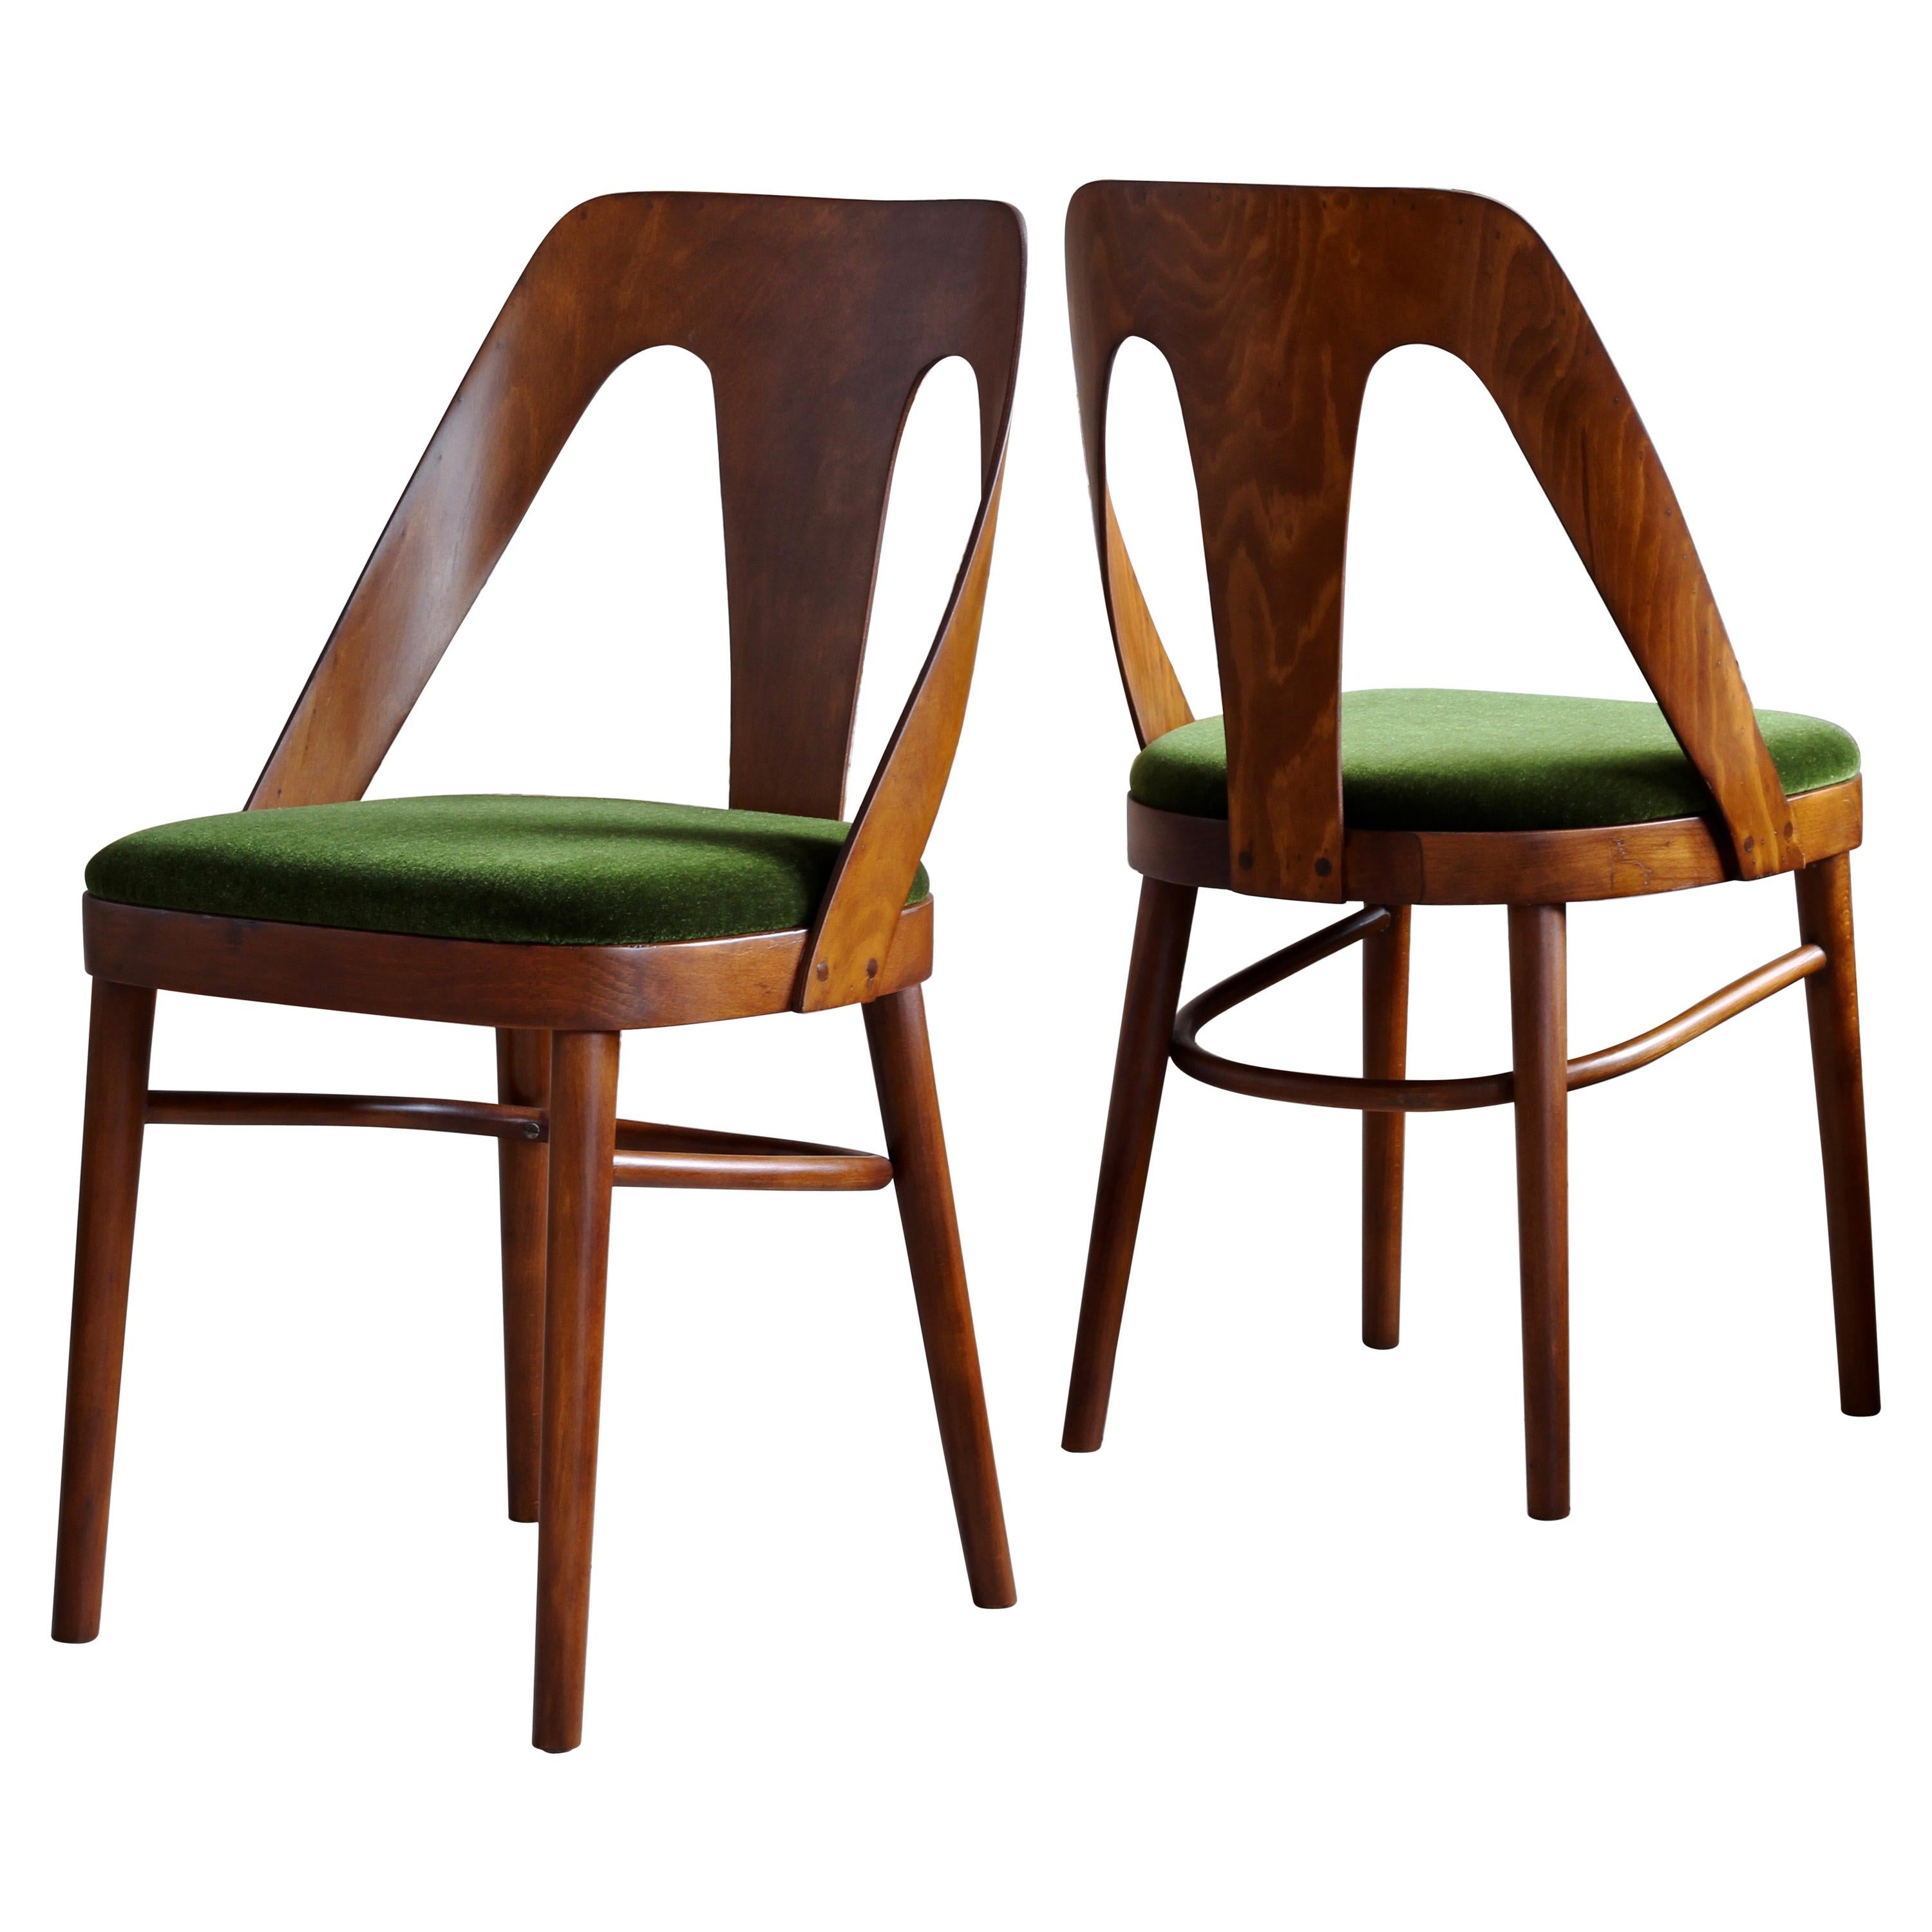 Midcentury Set of 4 Dining Chairs in Juicy Green Mohair by Kvadrat